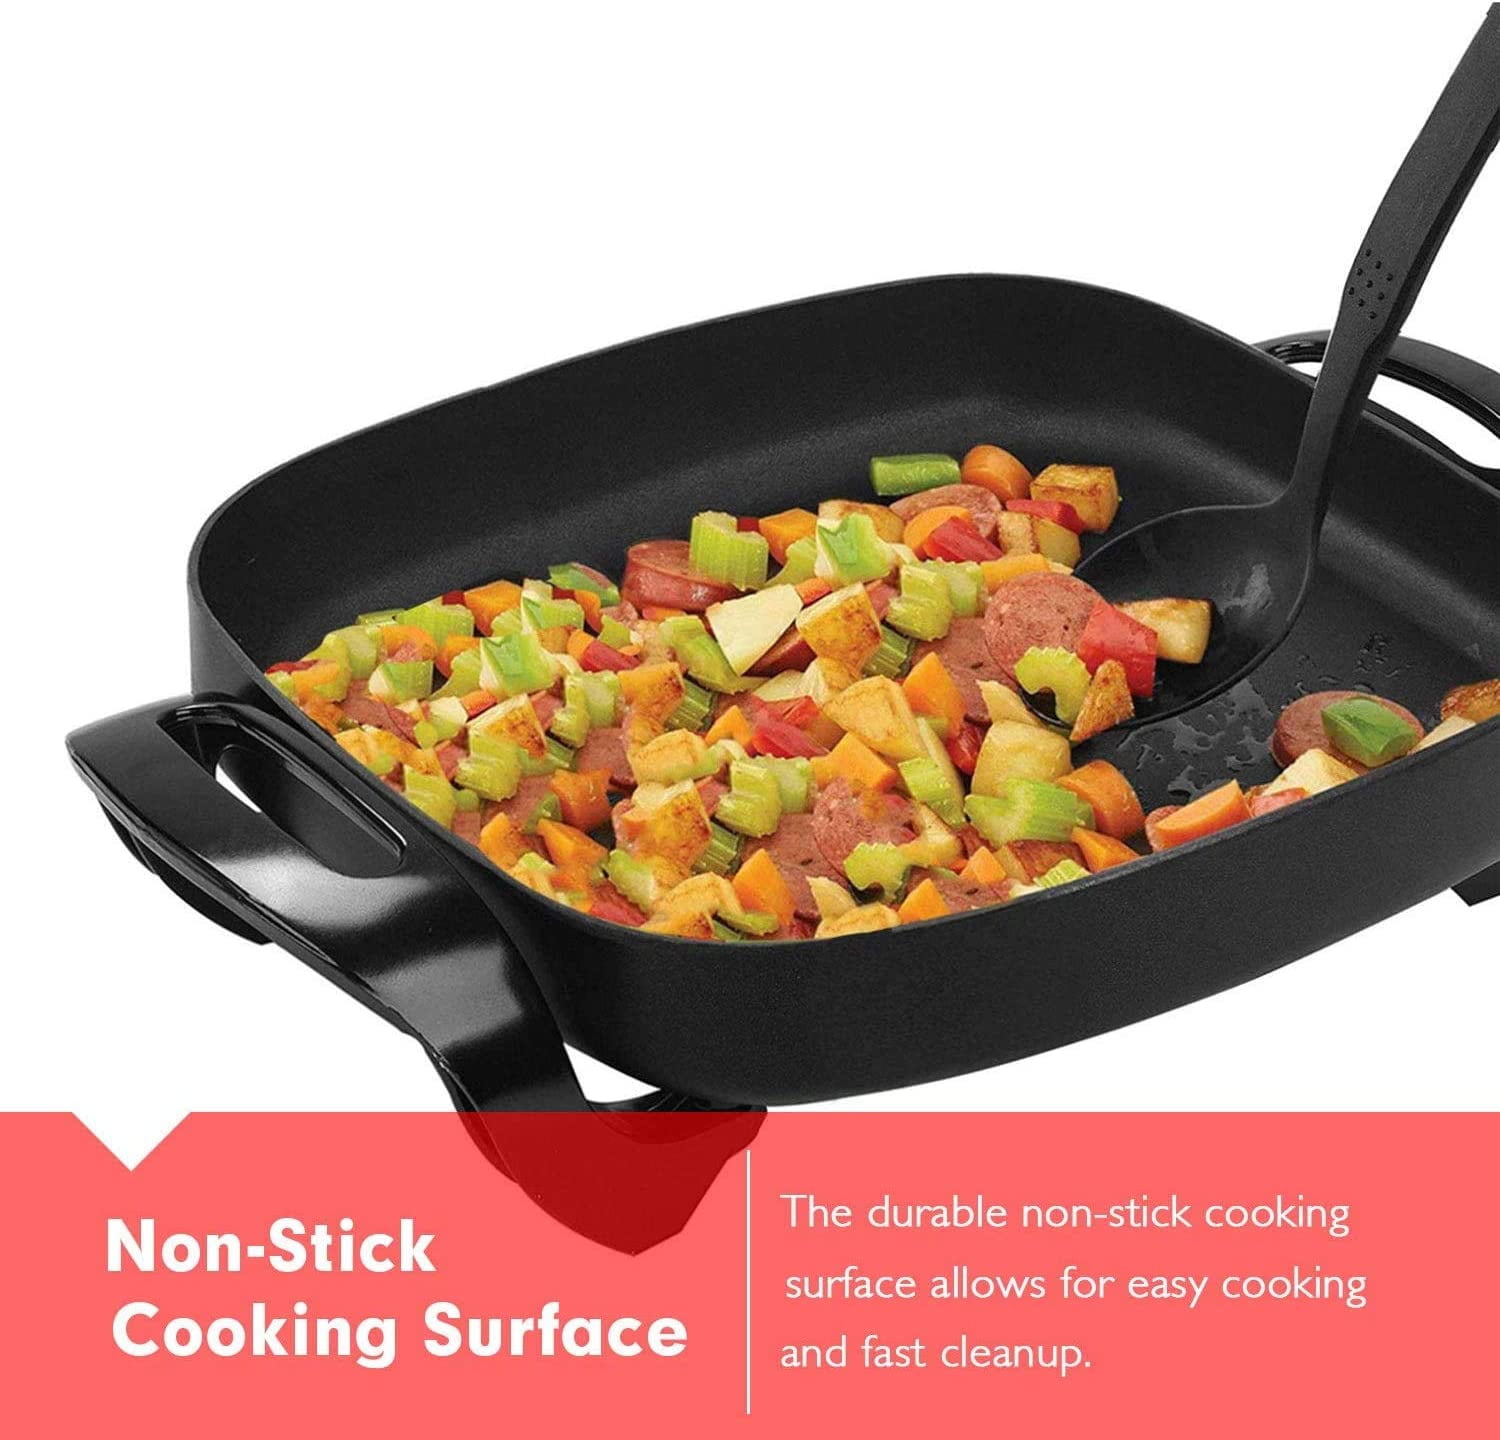  Electric Skillet Nonstick with Lids - 16 inch Extra